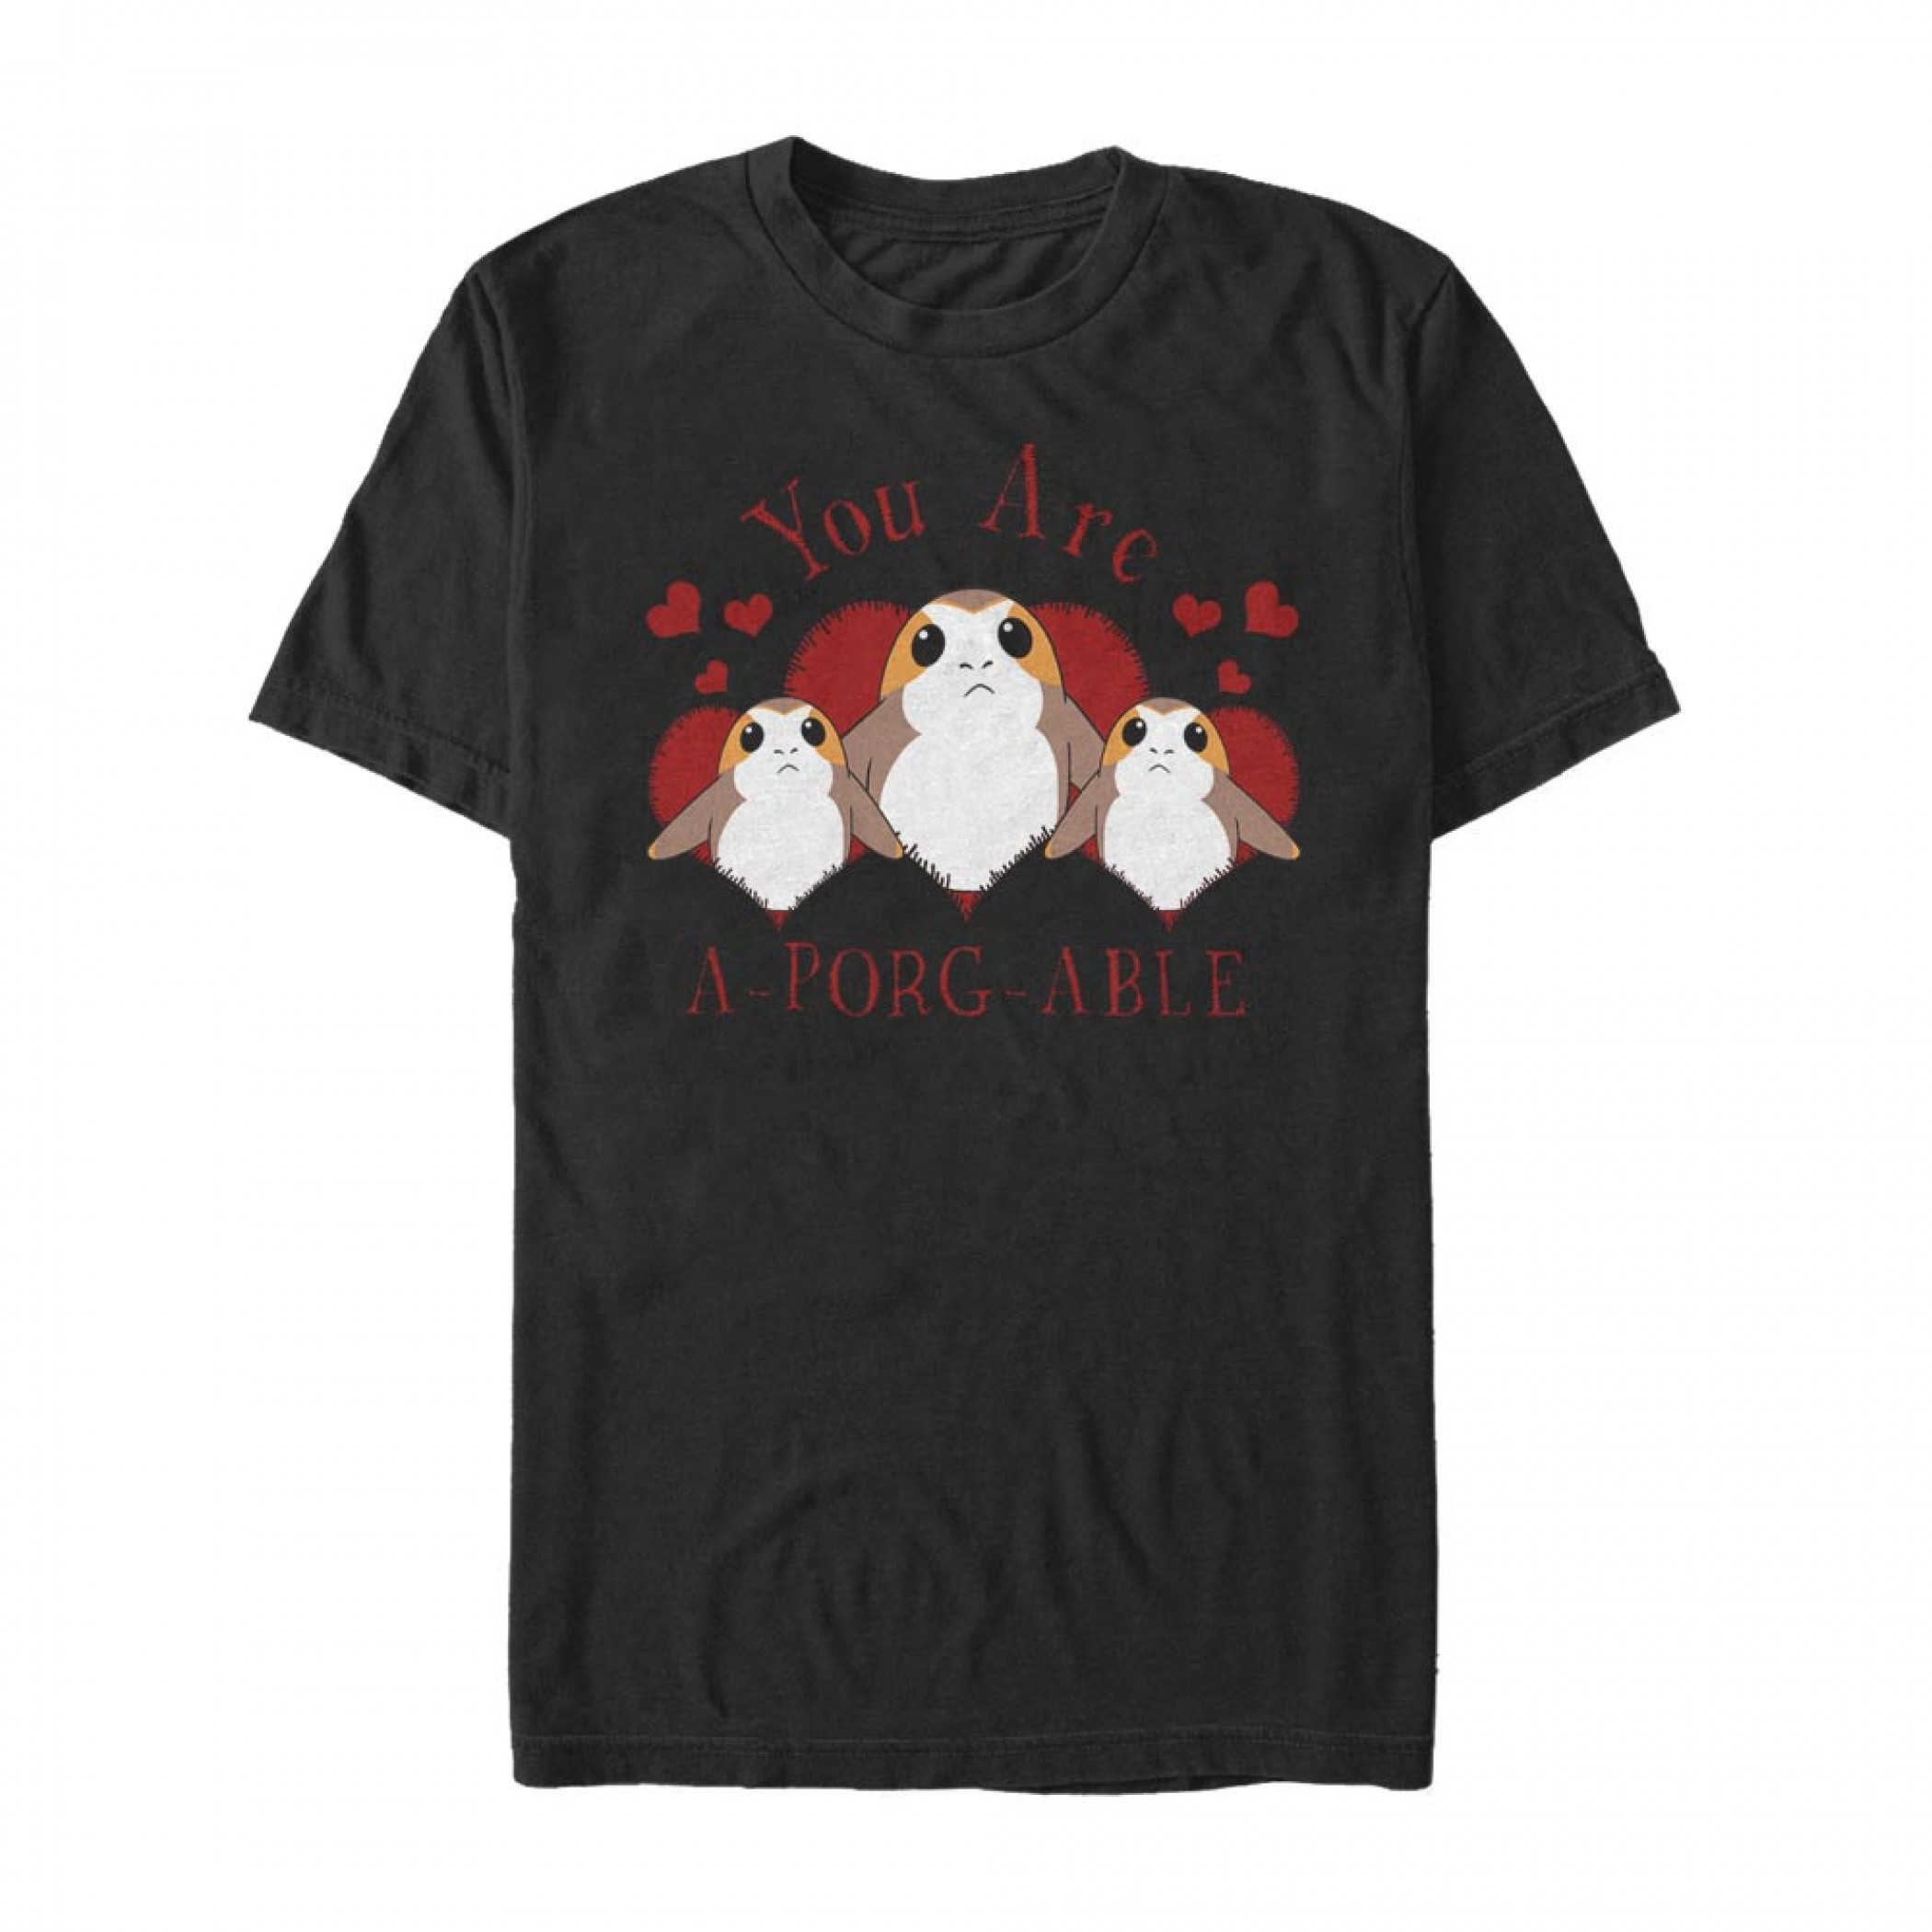 Star Wars You Are A-Porg-Able Black T-Shirt